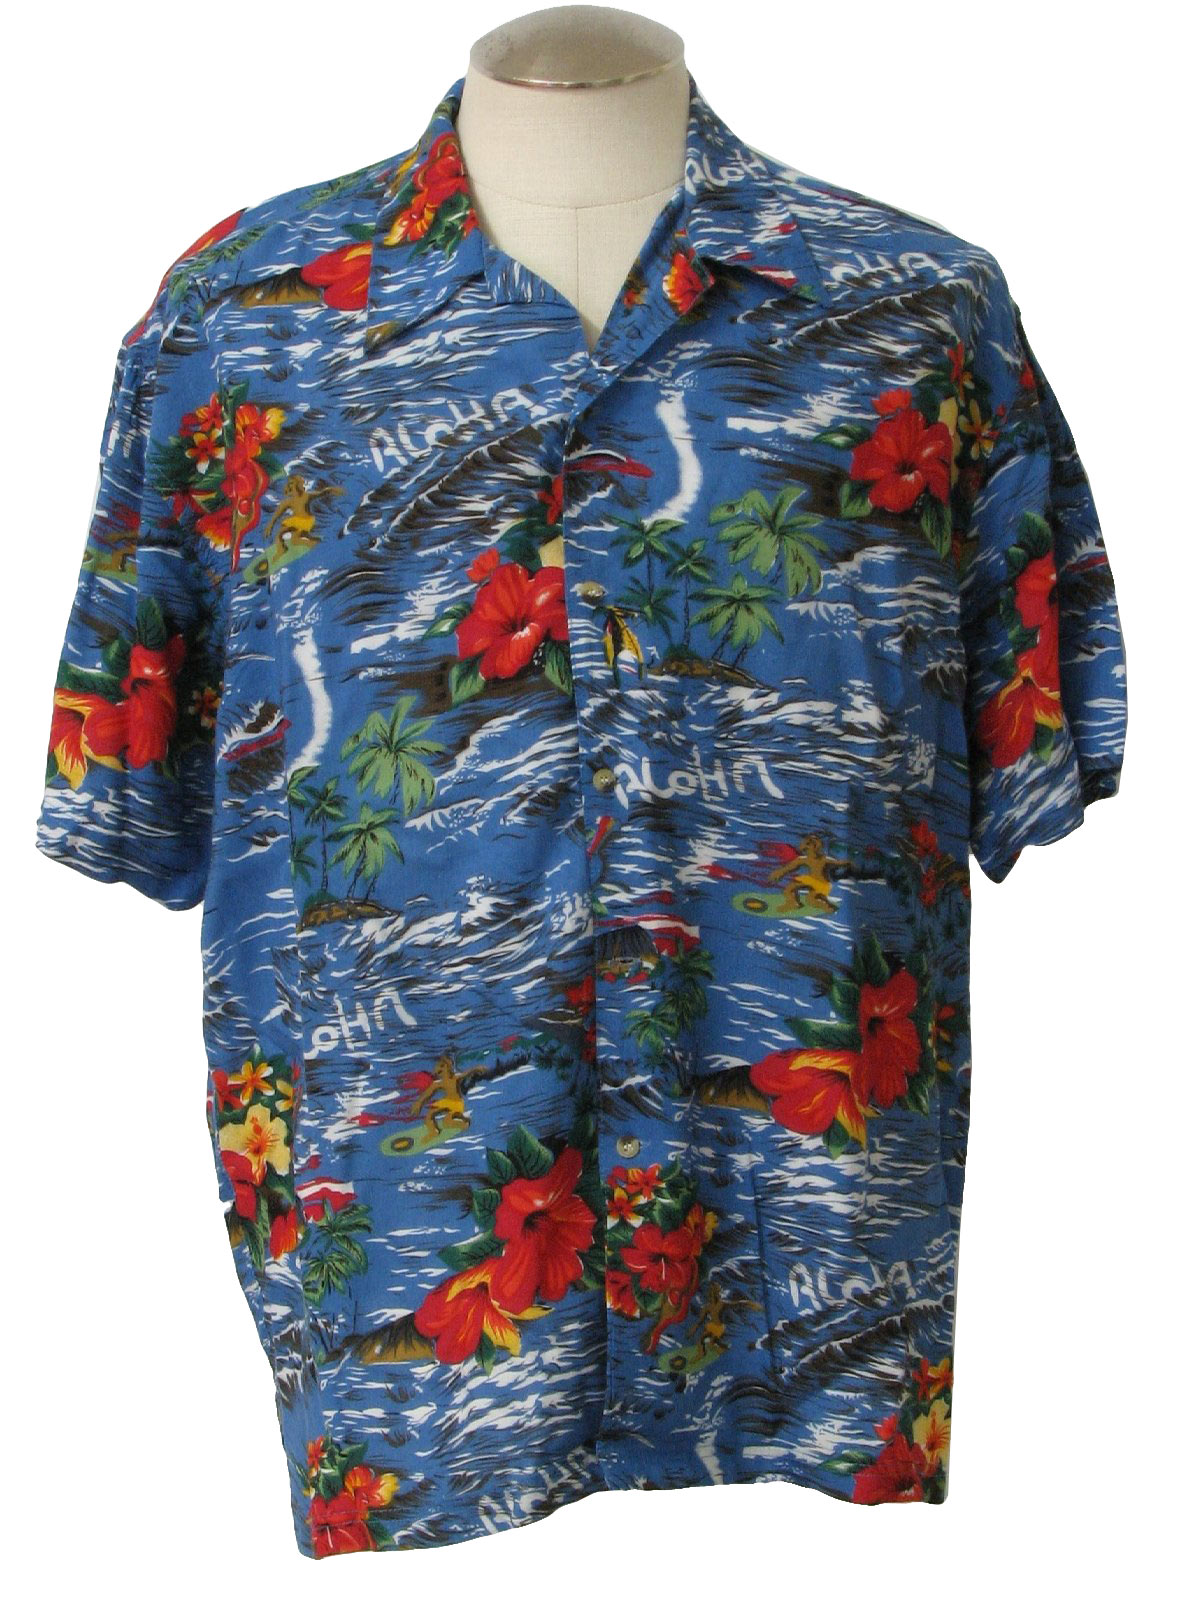 Eighties Vintage Hawaiian Shirt: Early 80s -Thums Up- Mens white, blue ...